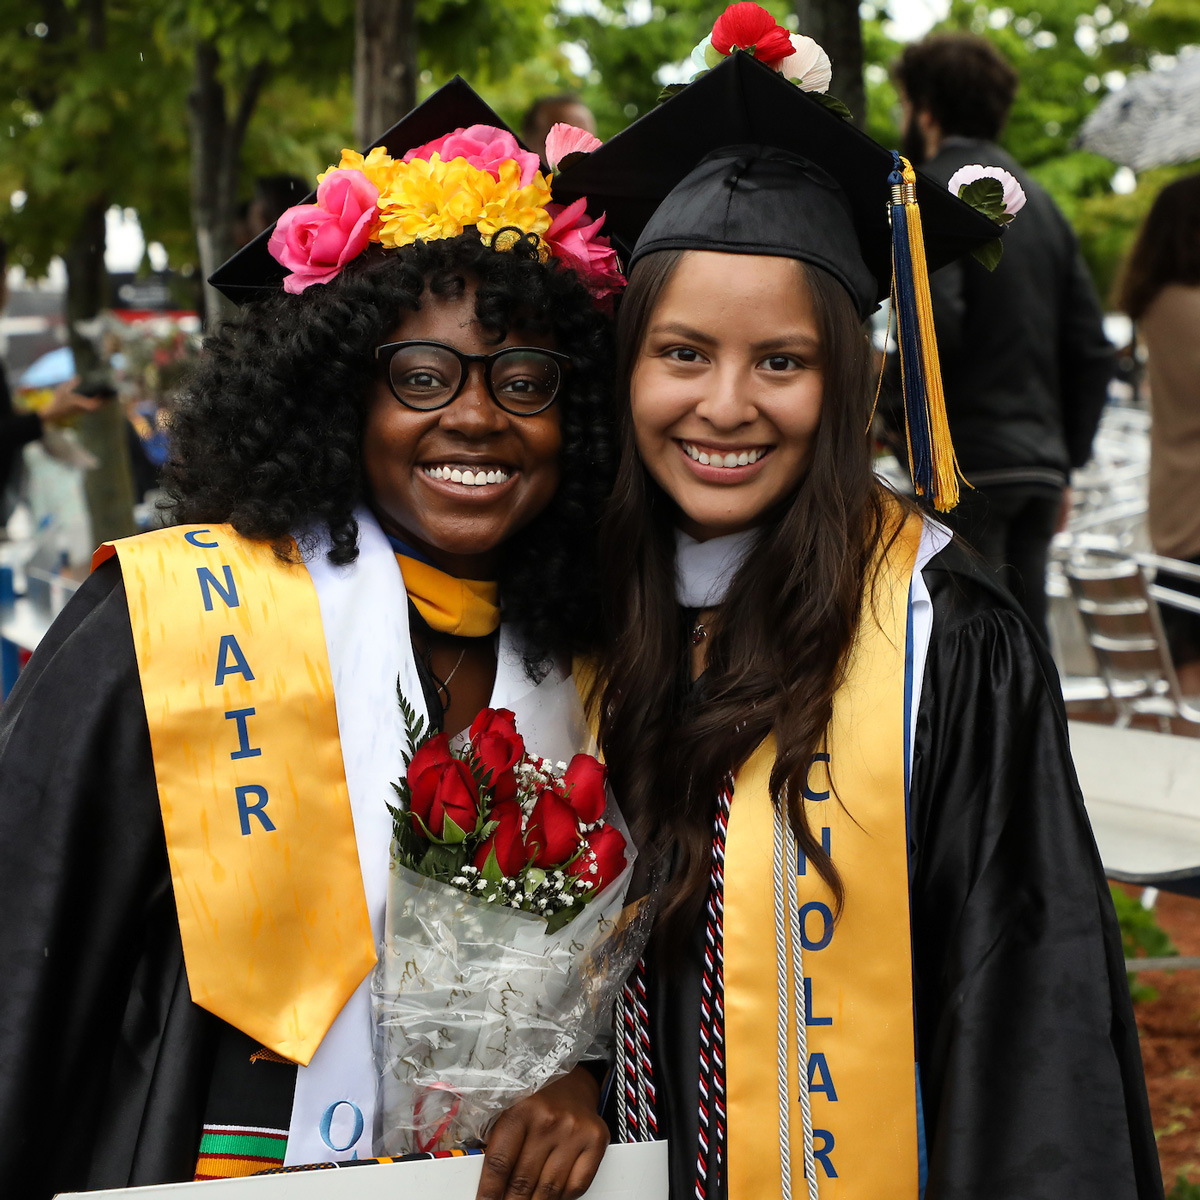 Arly posing for a photo with a friend wearing her cap and gown following Commencement.